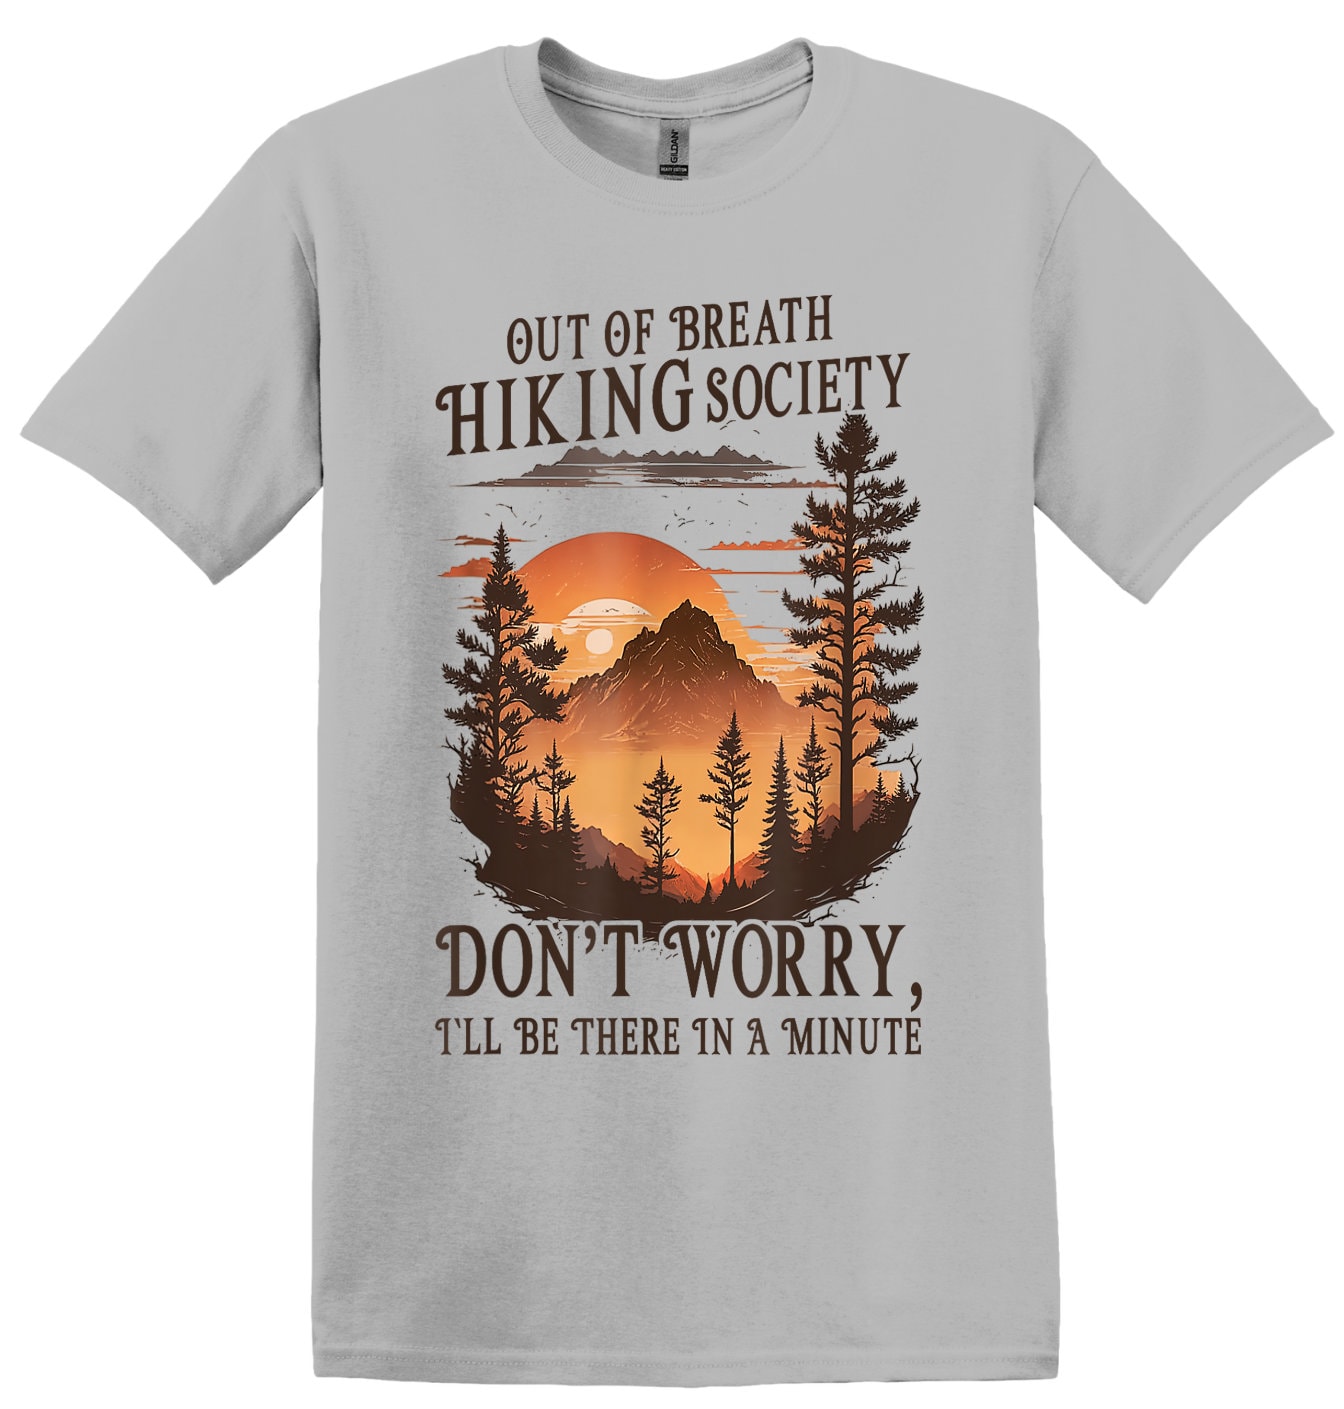 Out of Breath Hiking, Funny Outdoors Camping Short Sleeve Cotton Shirt, Women and Unisex Style, Adult Tee